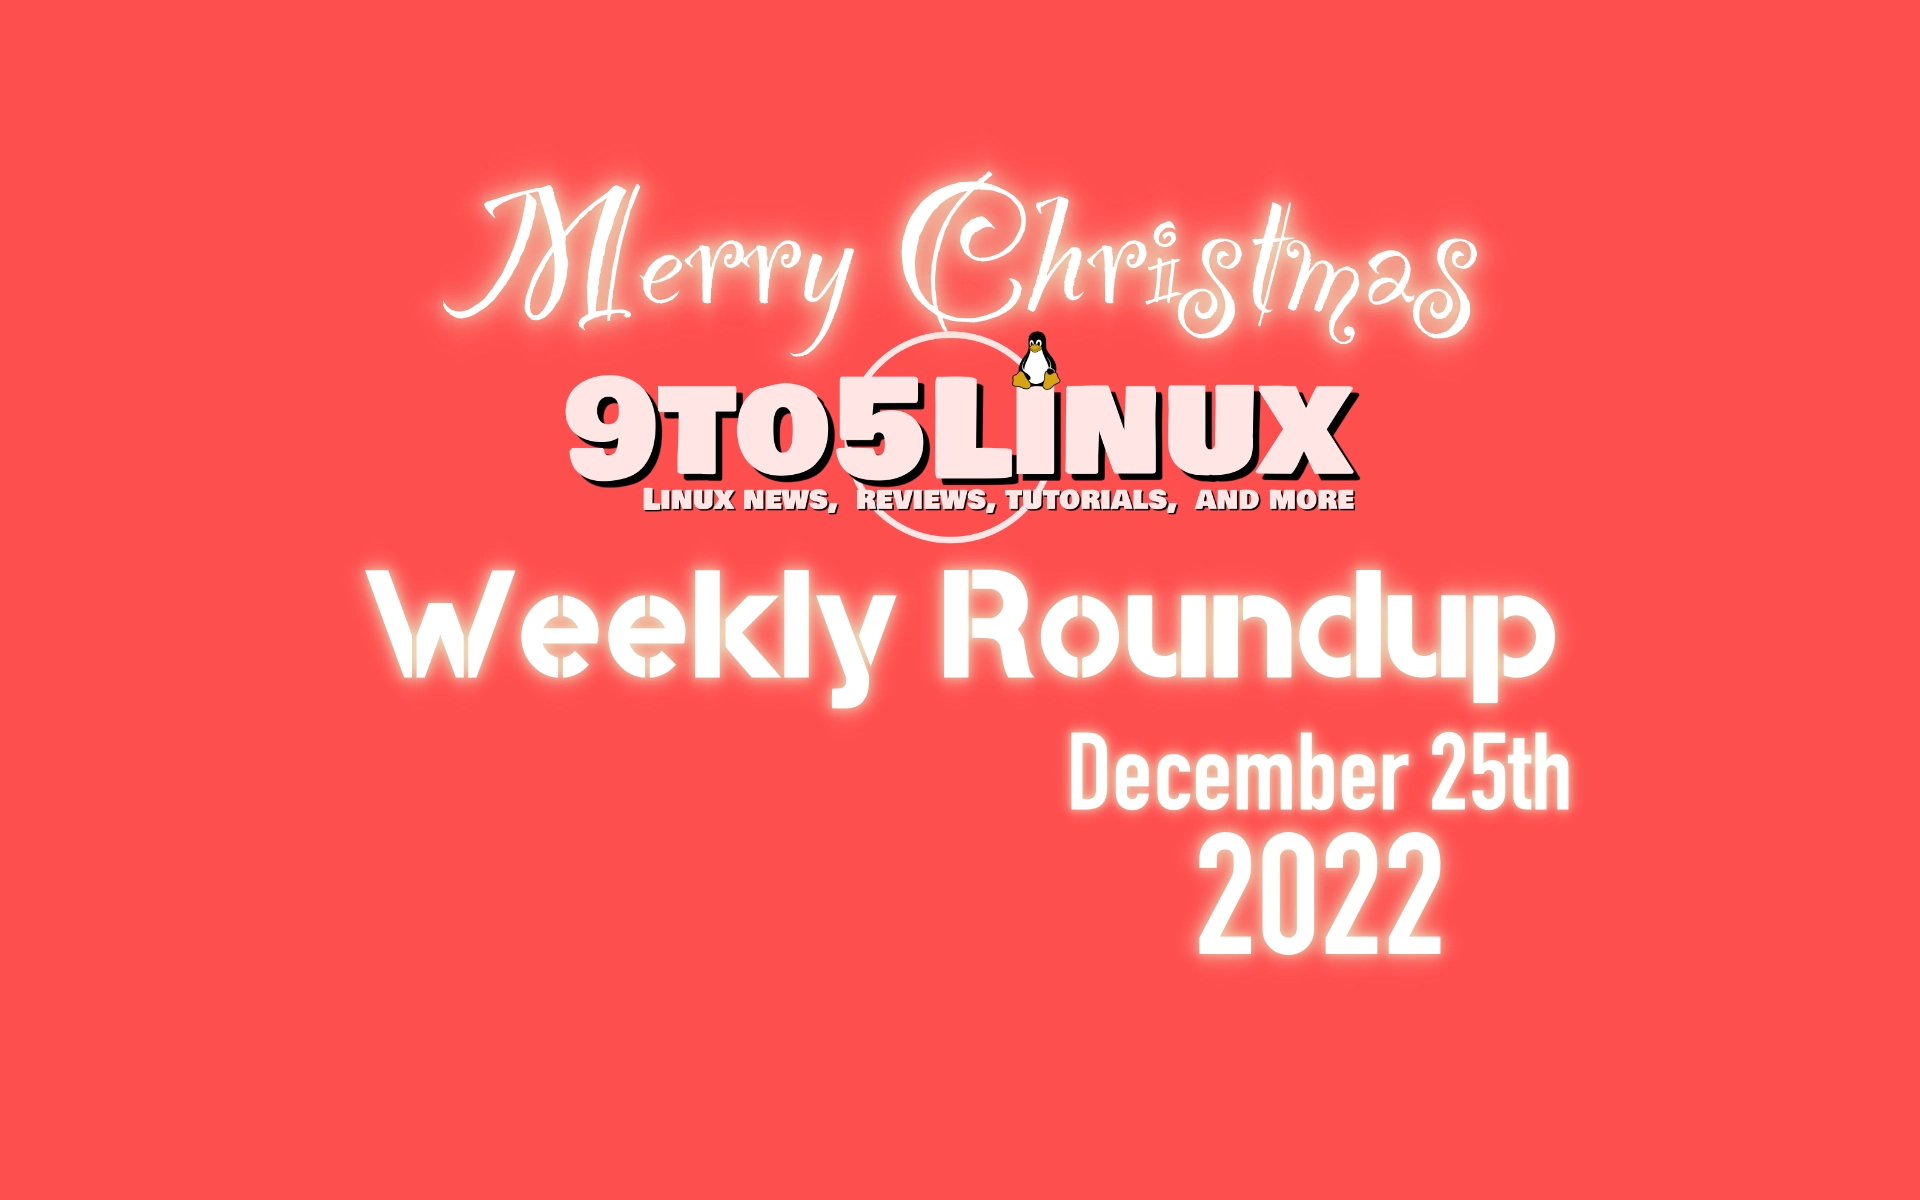 9to5Linux Weekly Roundup: December 25th, 2022 (Christmas Edition)